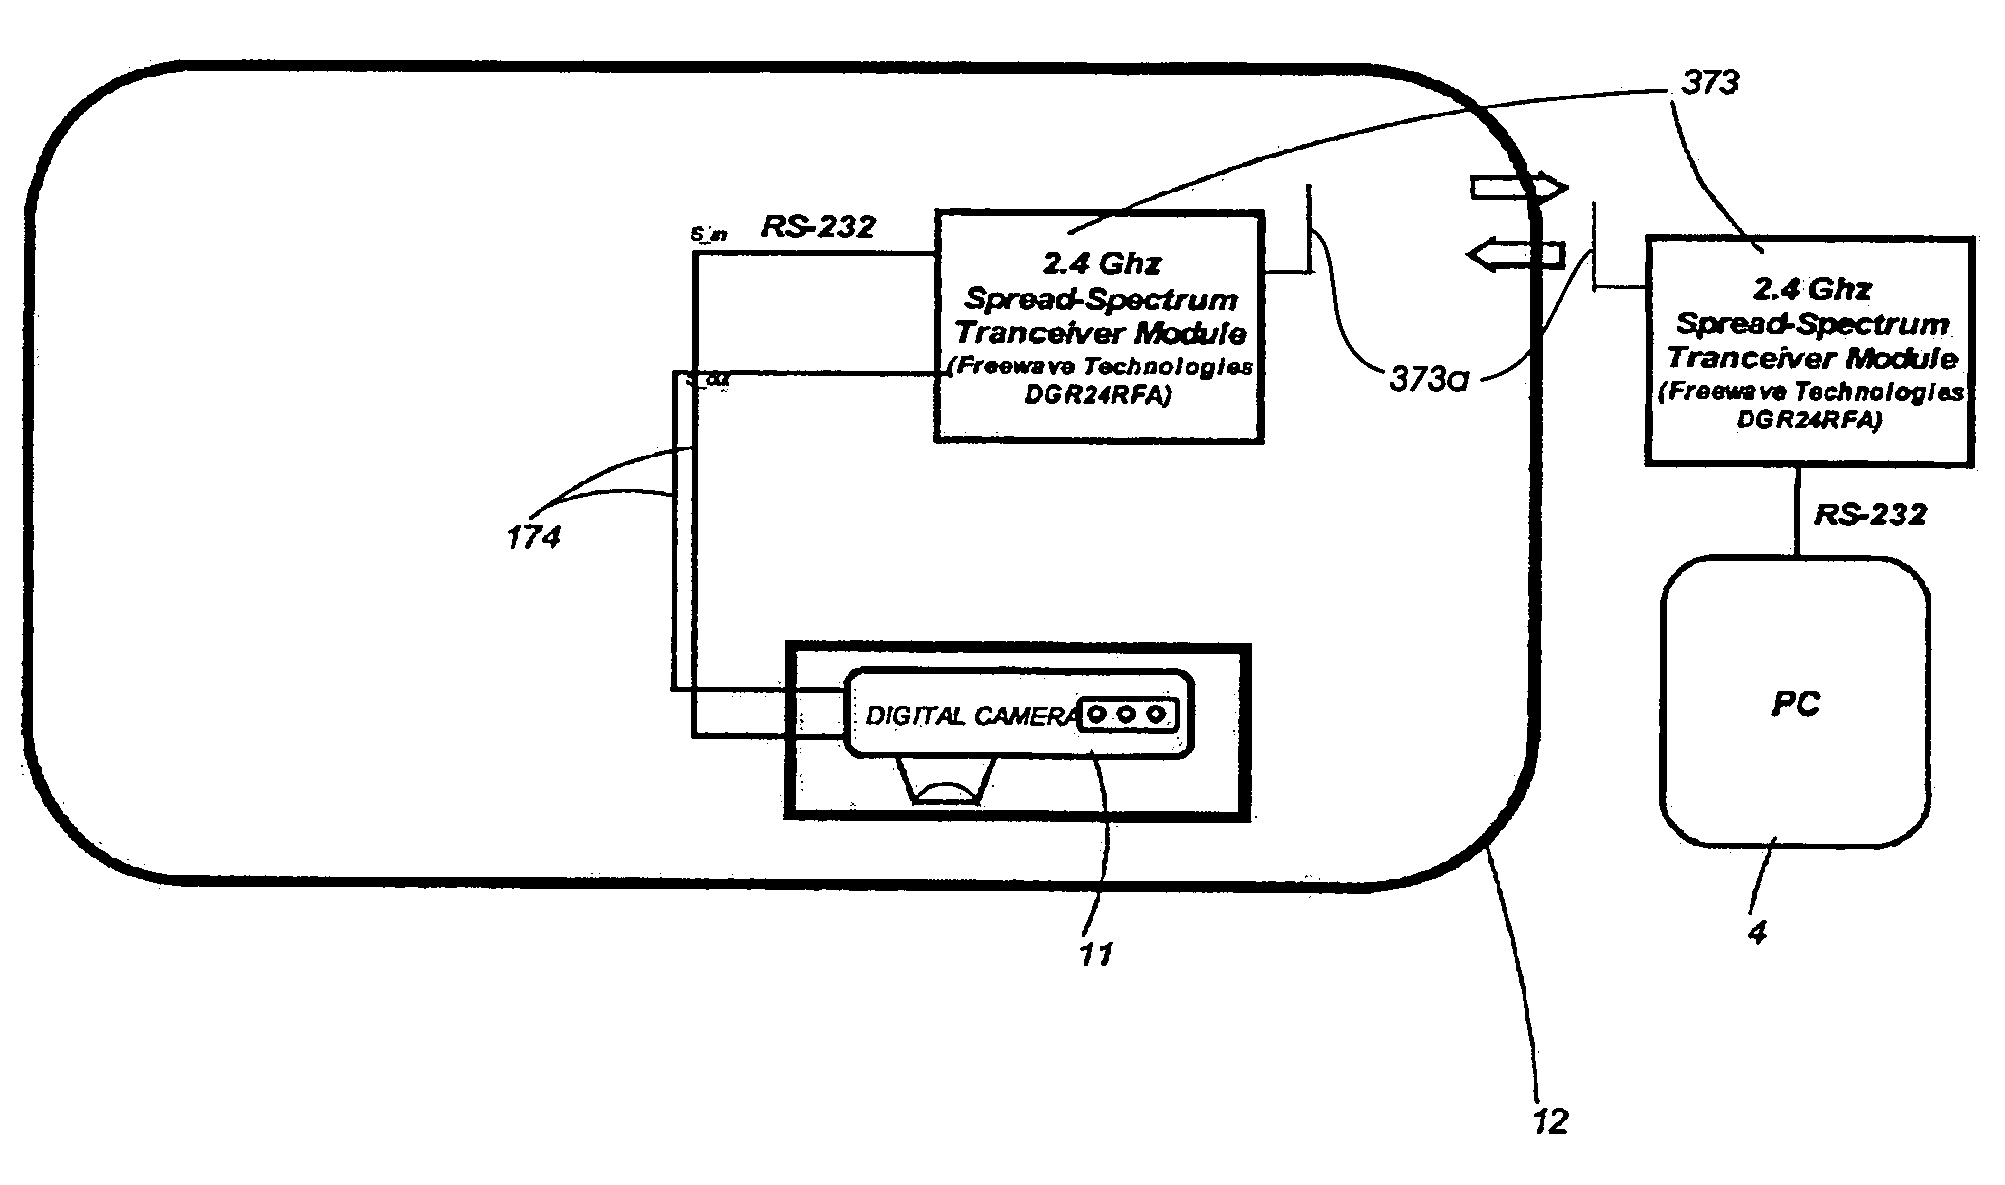 Sealed, waterproof digital electronic camera system and method of fabricating and communicating with same